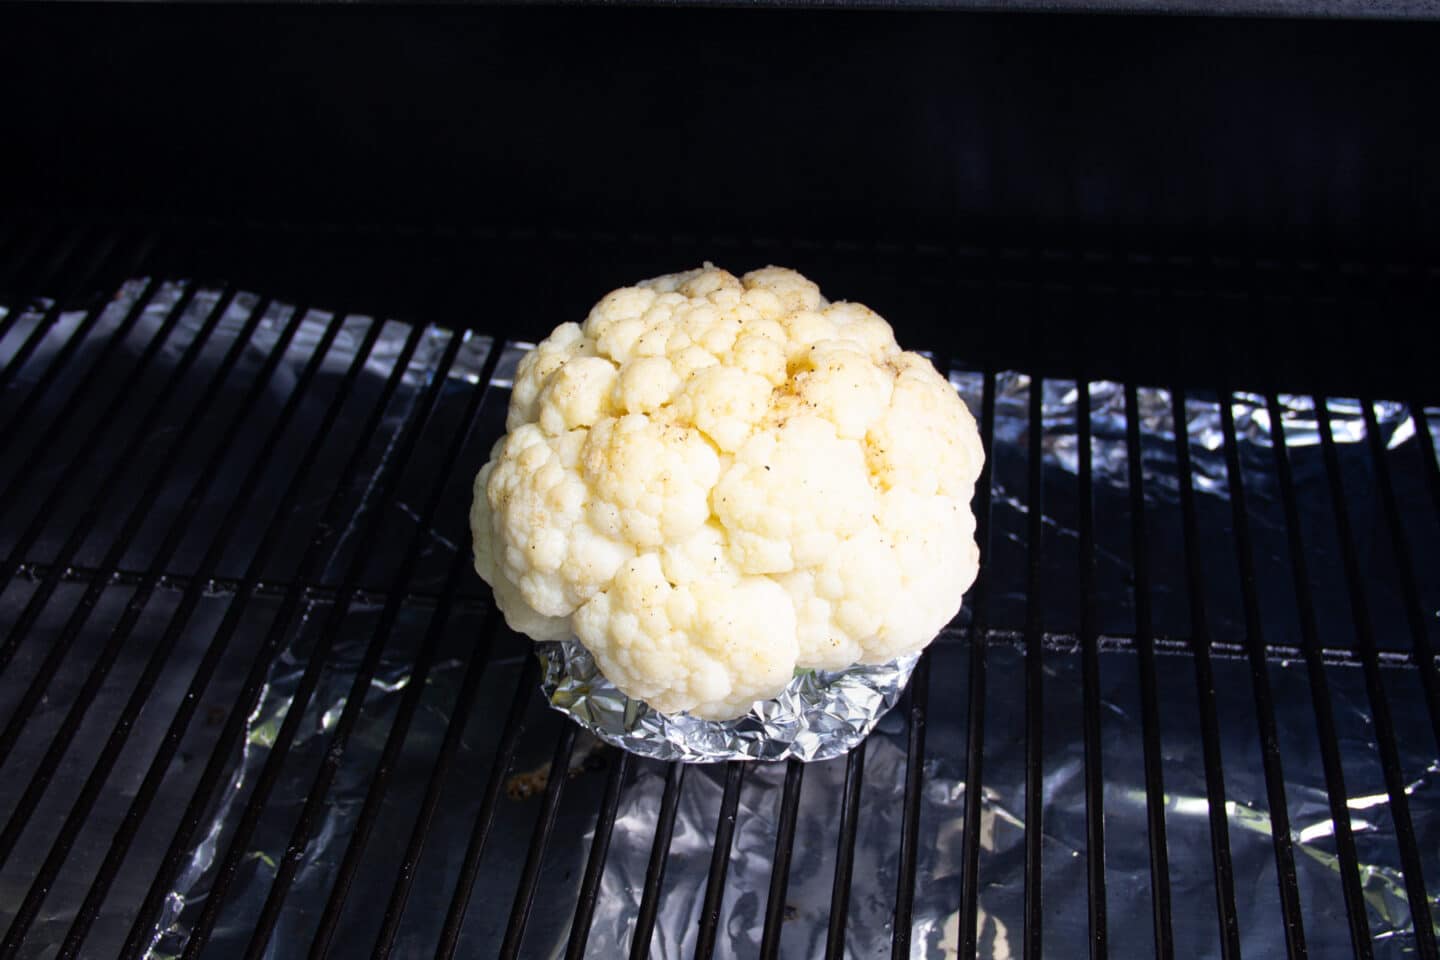 Picture of cauliflower on the smoker.